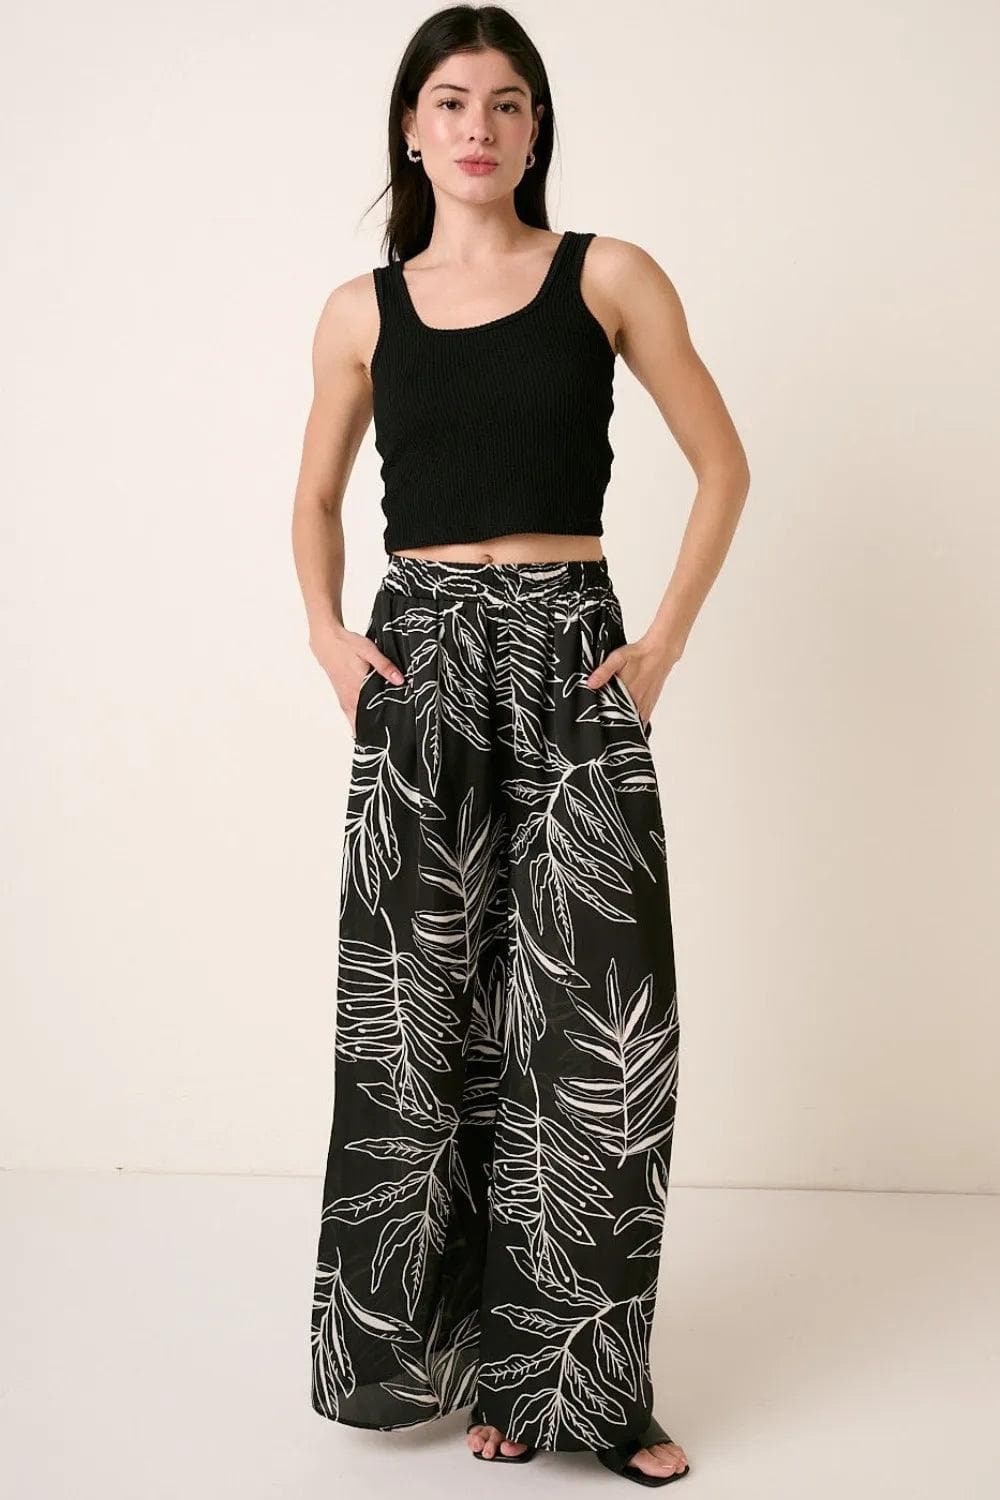 Mittoshop Printed Wide Leg Pants - SwagglyLife Home & Fashion